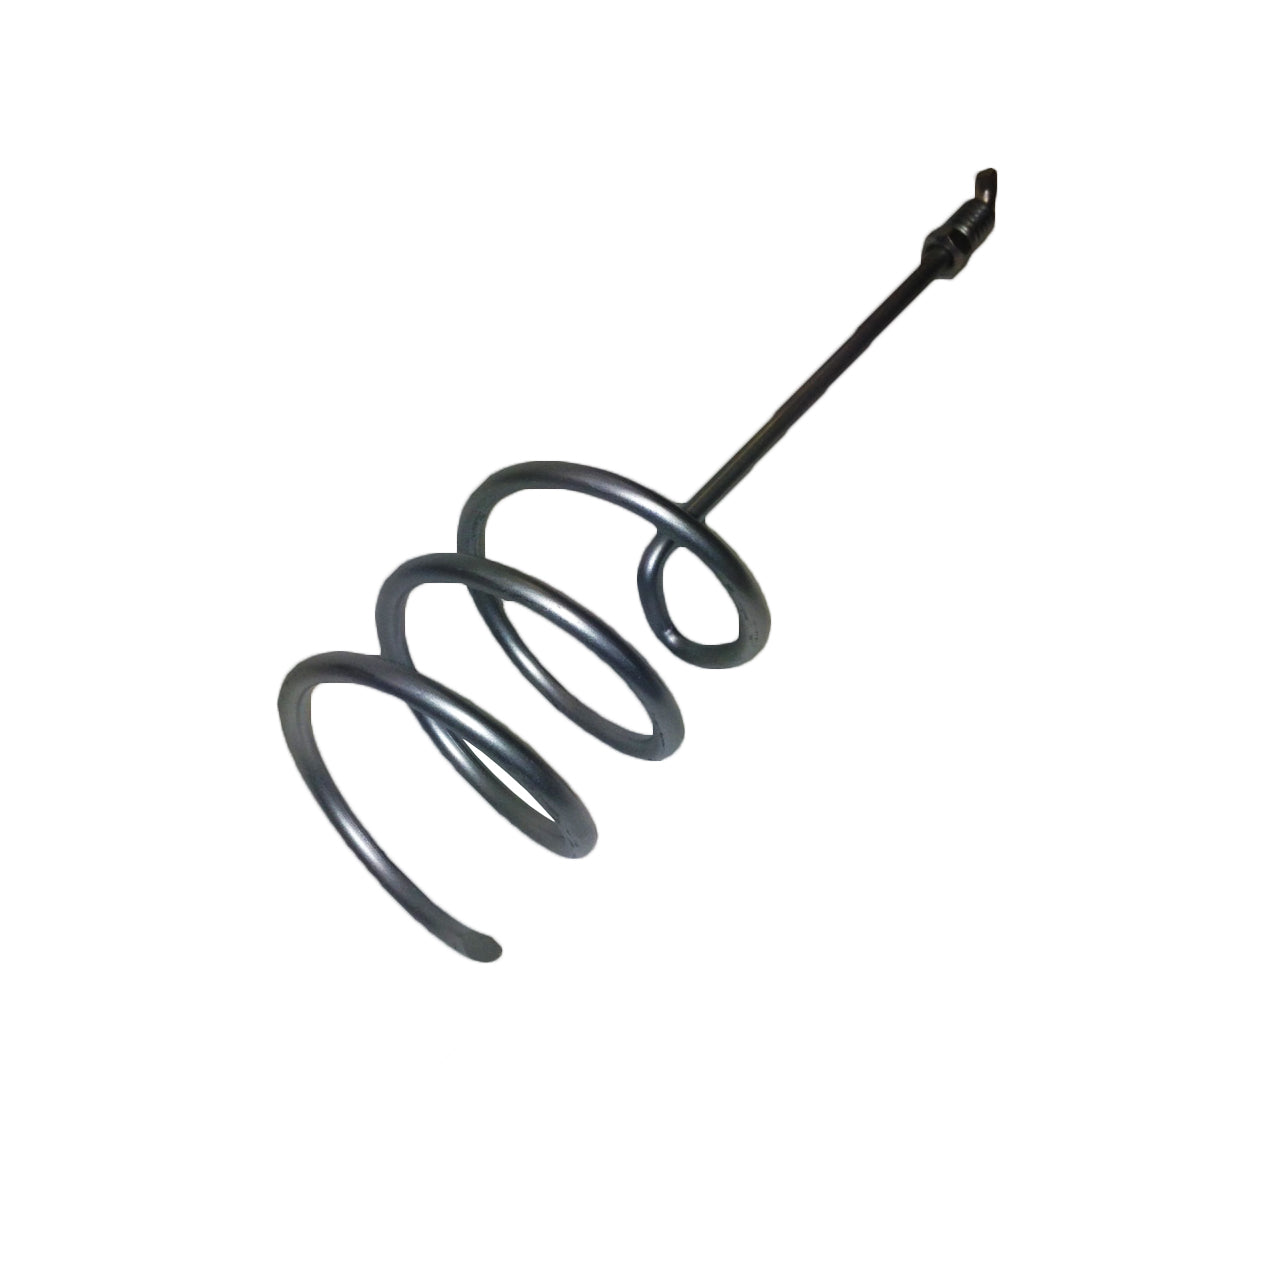 Round Wire Corkscrew for sewer cleaning